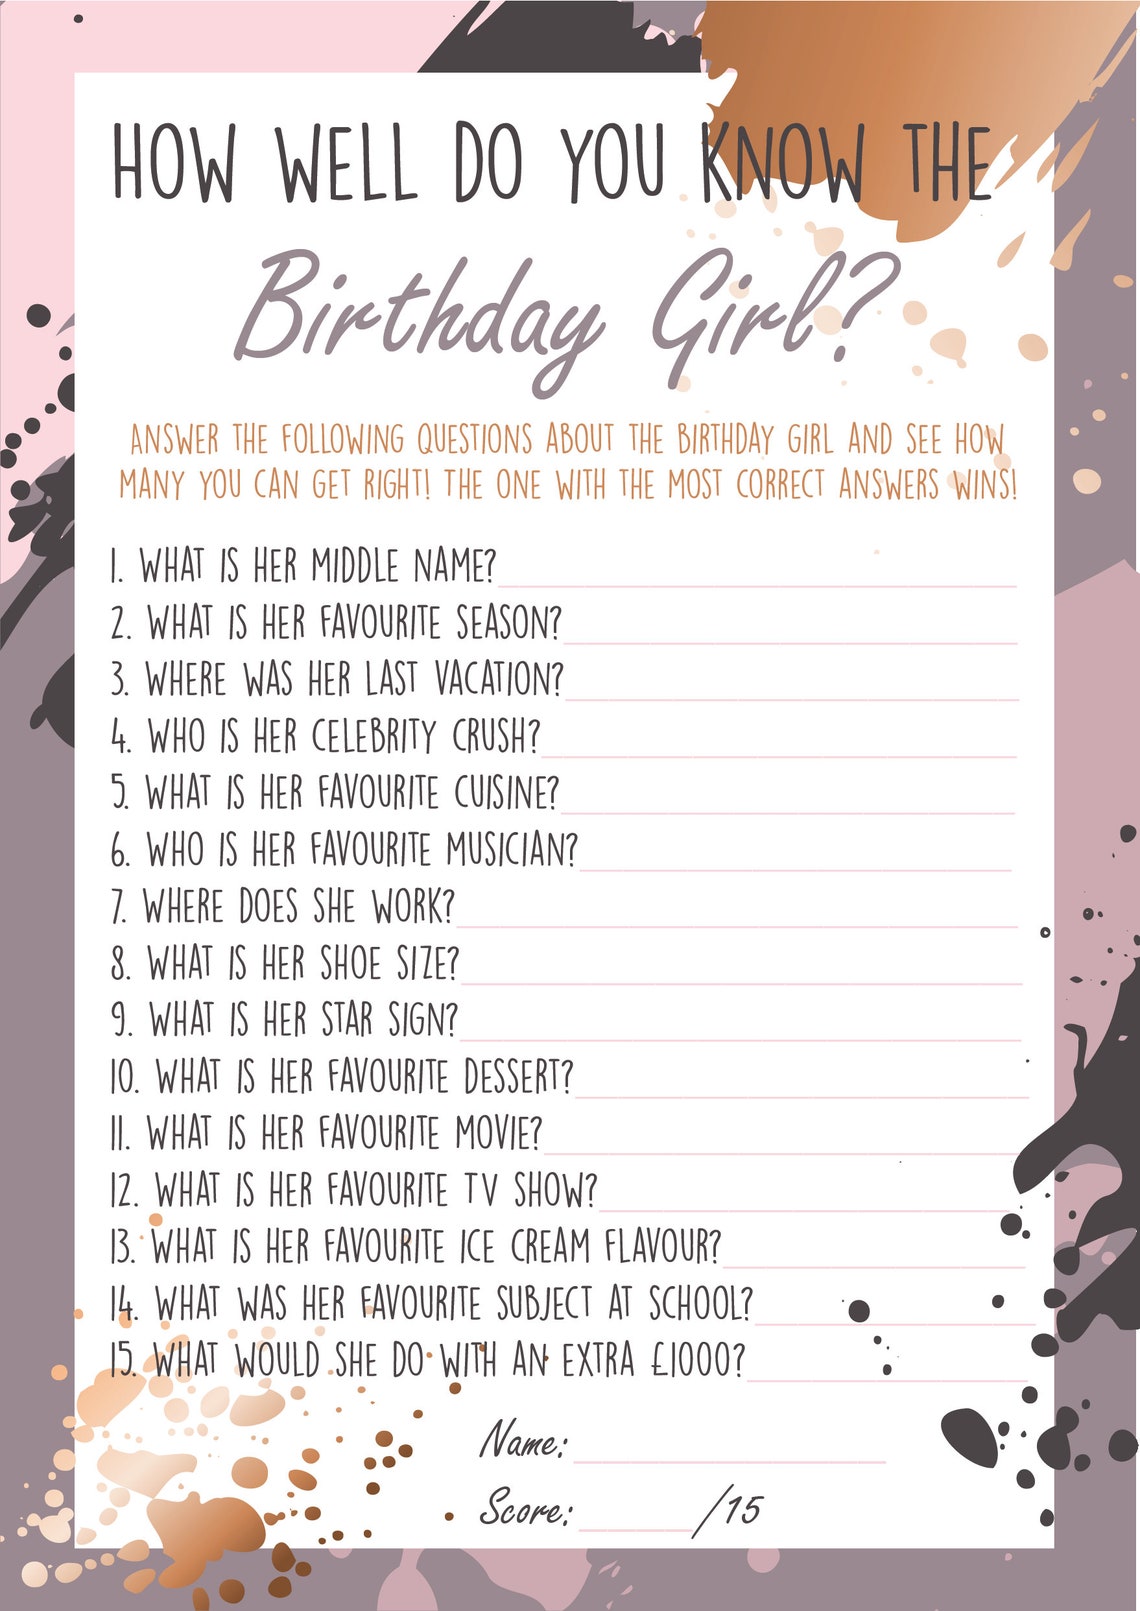 birthday-quiz-how-well-do-you-know-the-birthday-girl-would-etsy